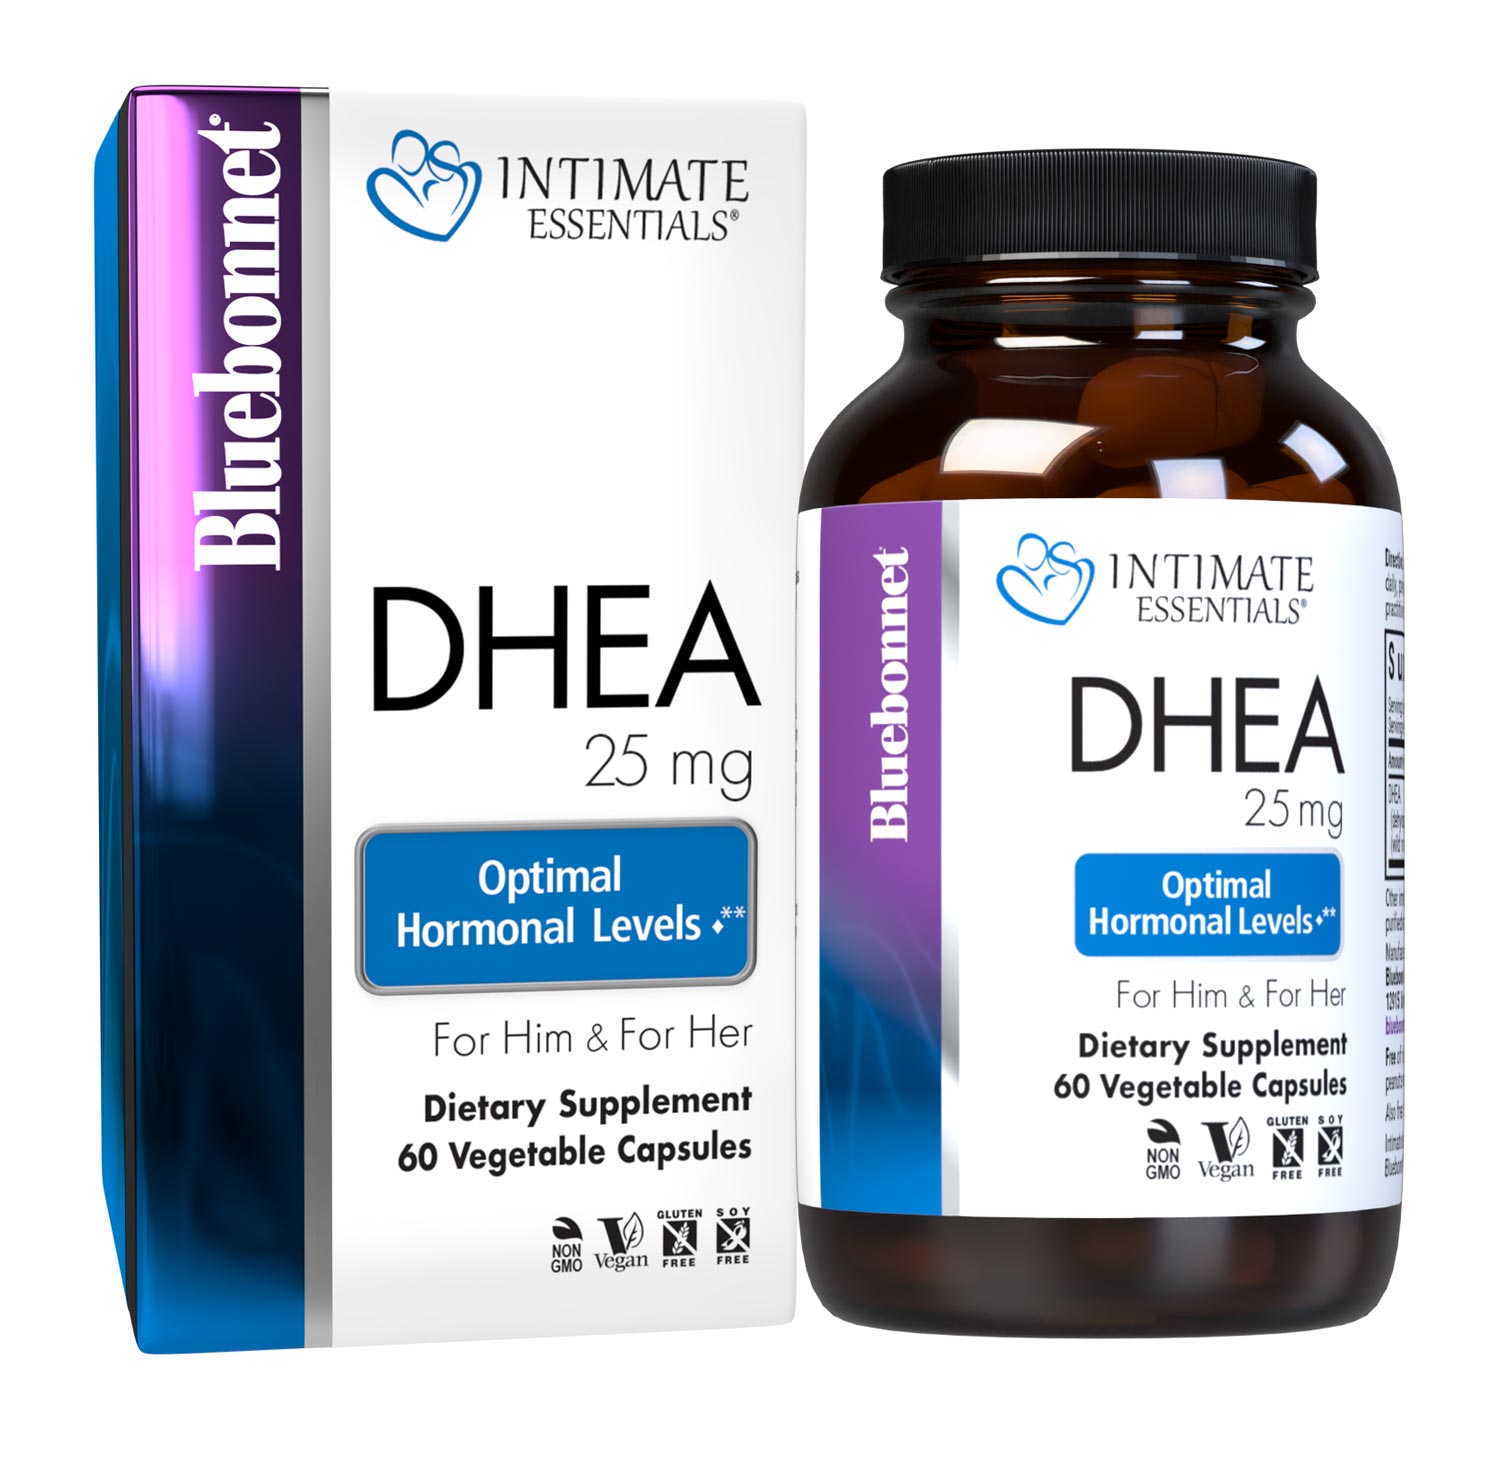 Bluebonnet’s Intimate Essentials DHEA 25 mg 60 pill count bottle comes in box. #size_60 count